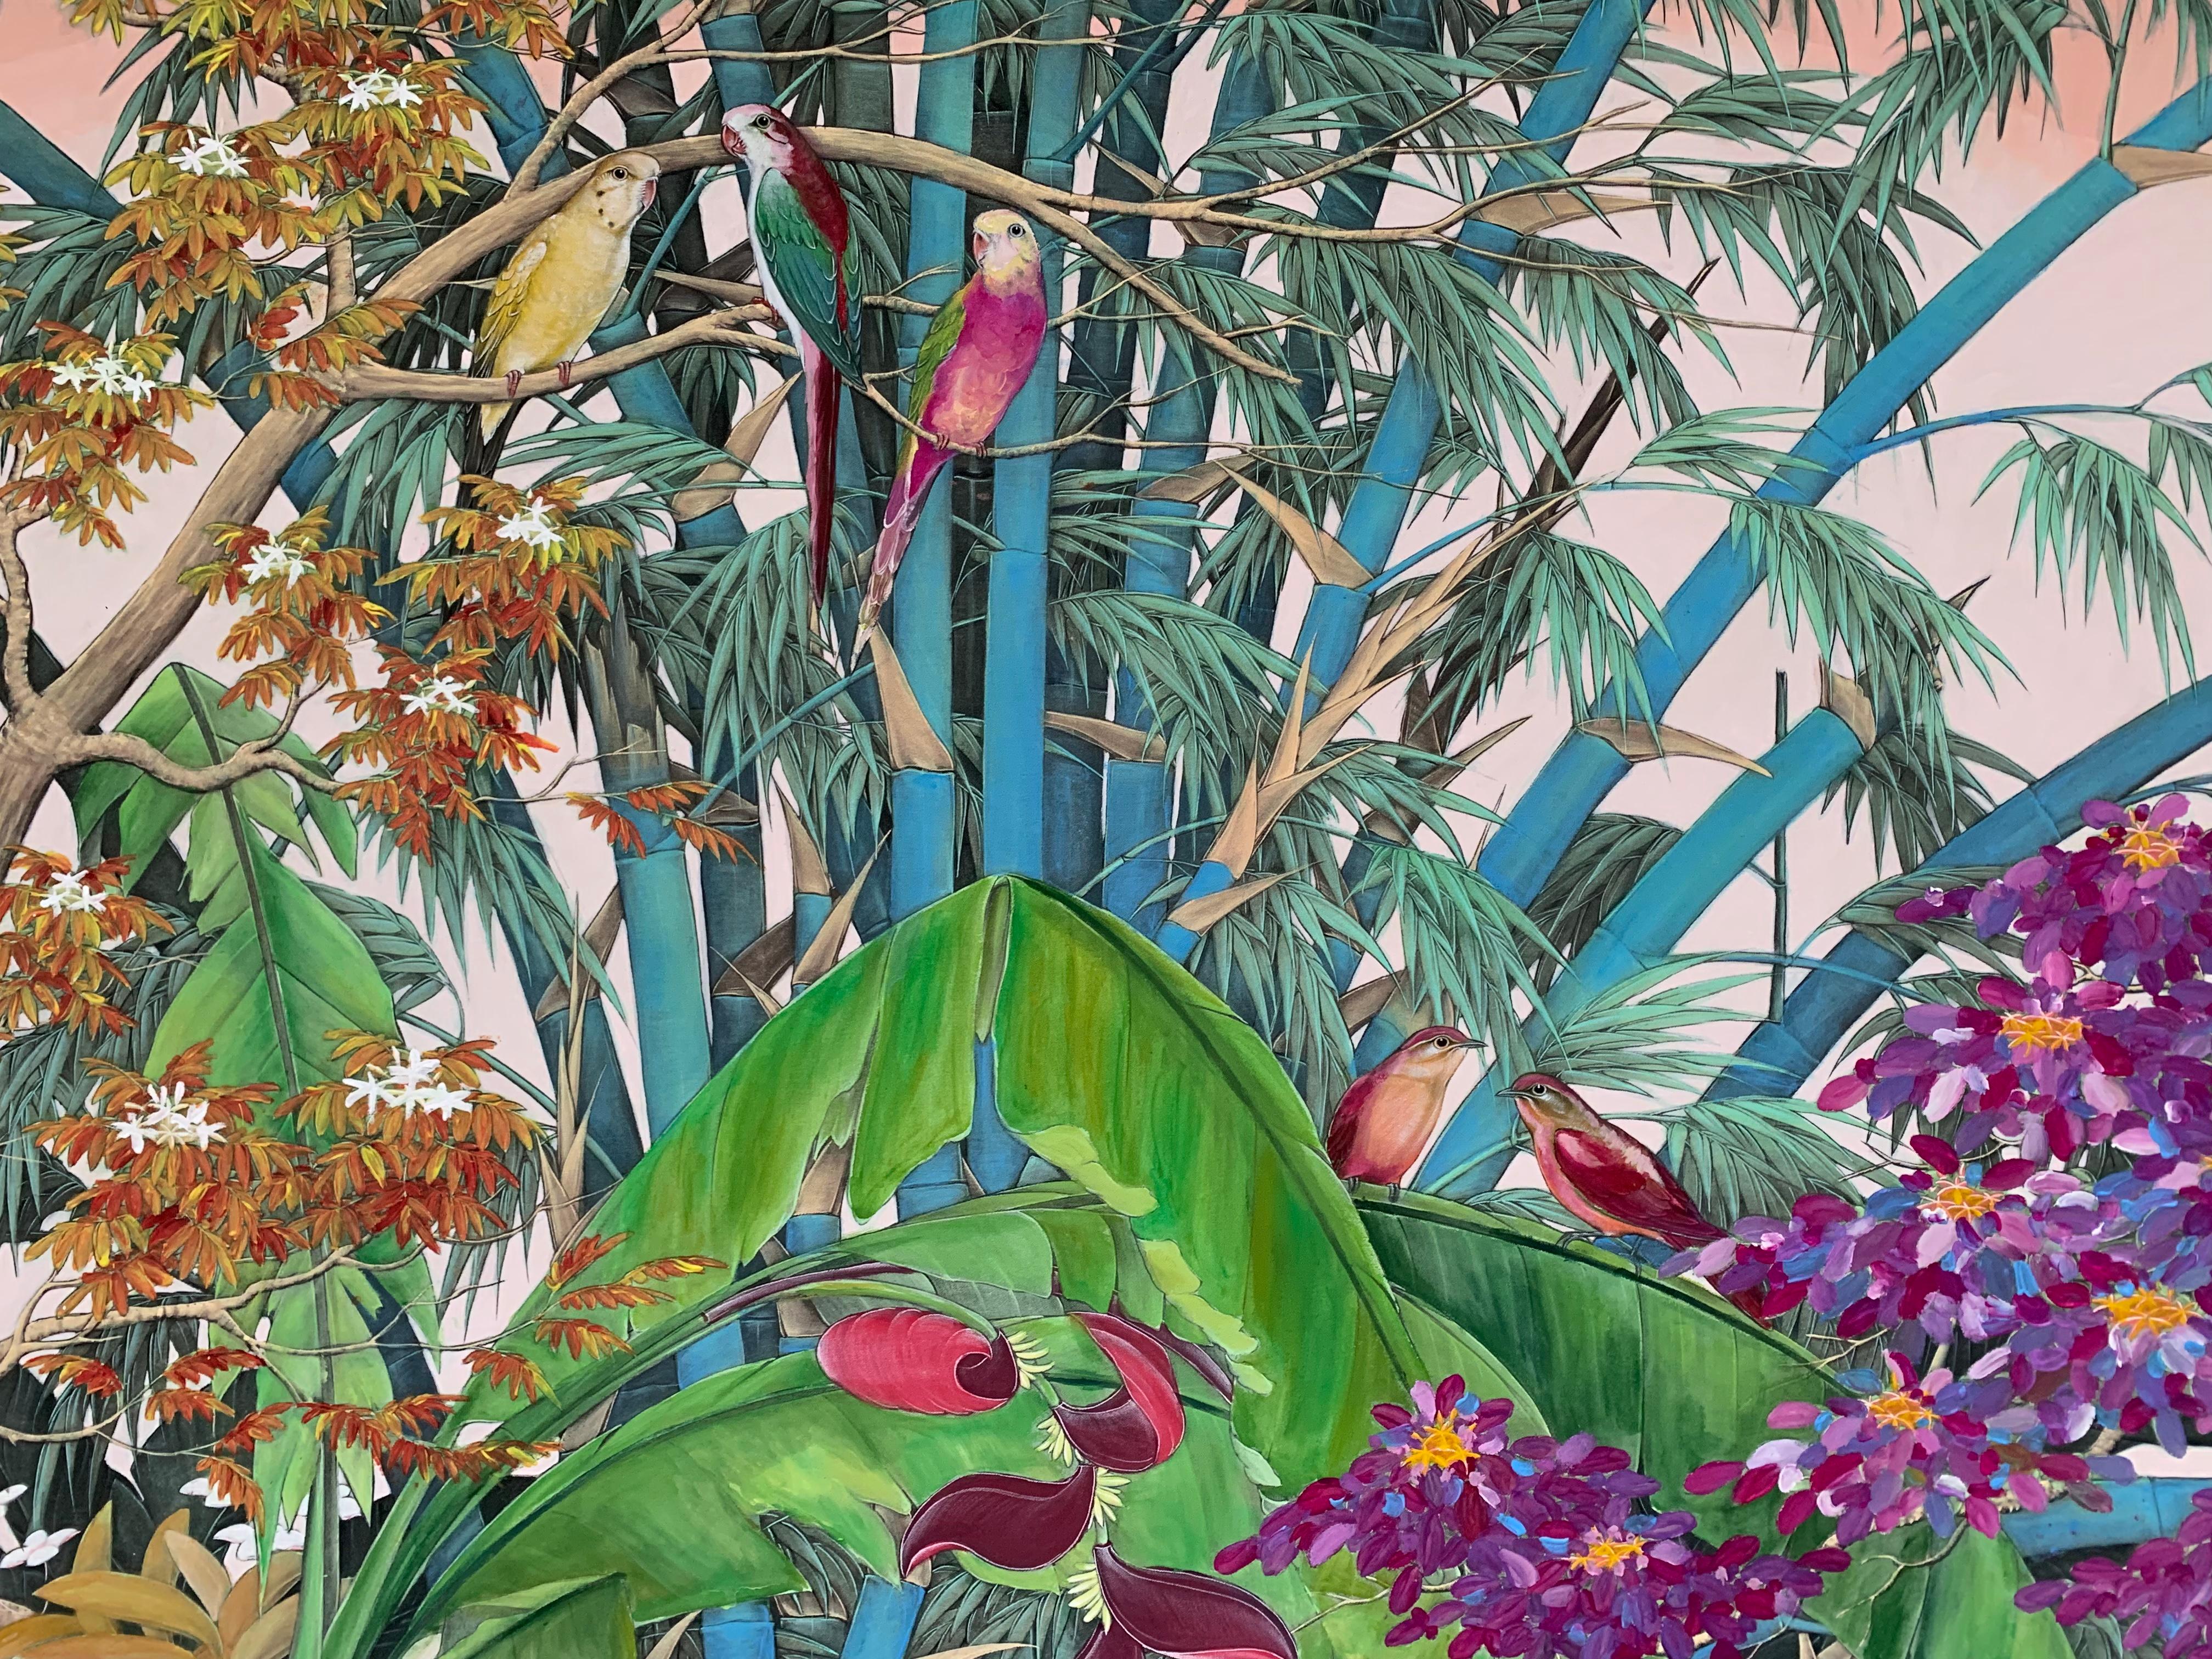 New Beginnings by Katharina Husslein contemporary birds and jungle landscape 3